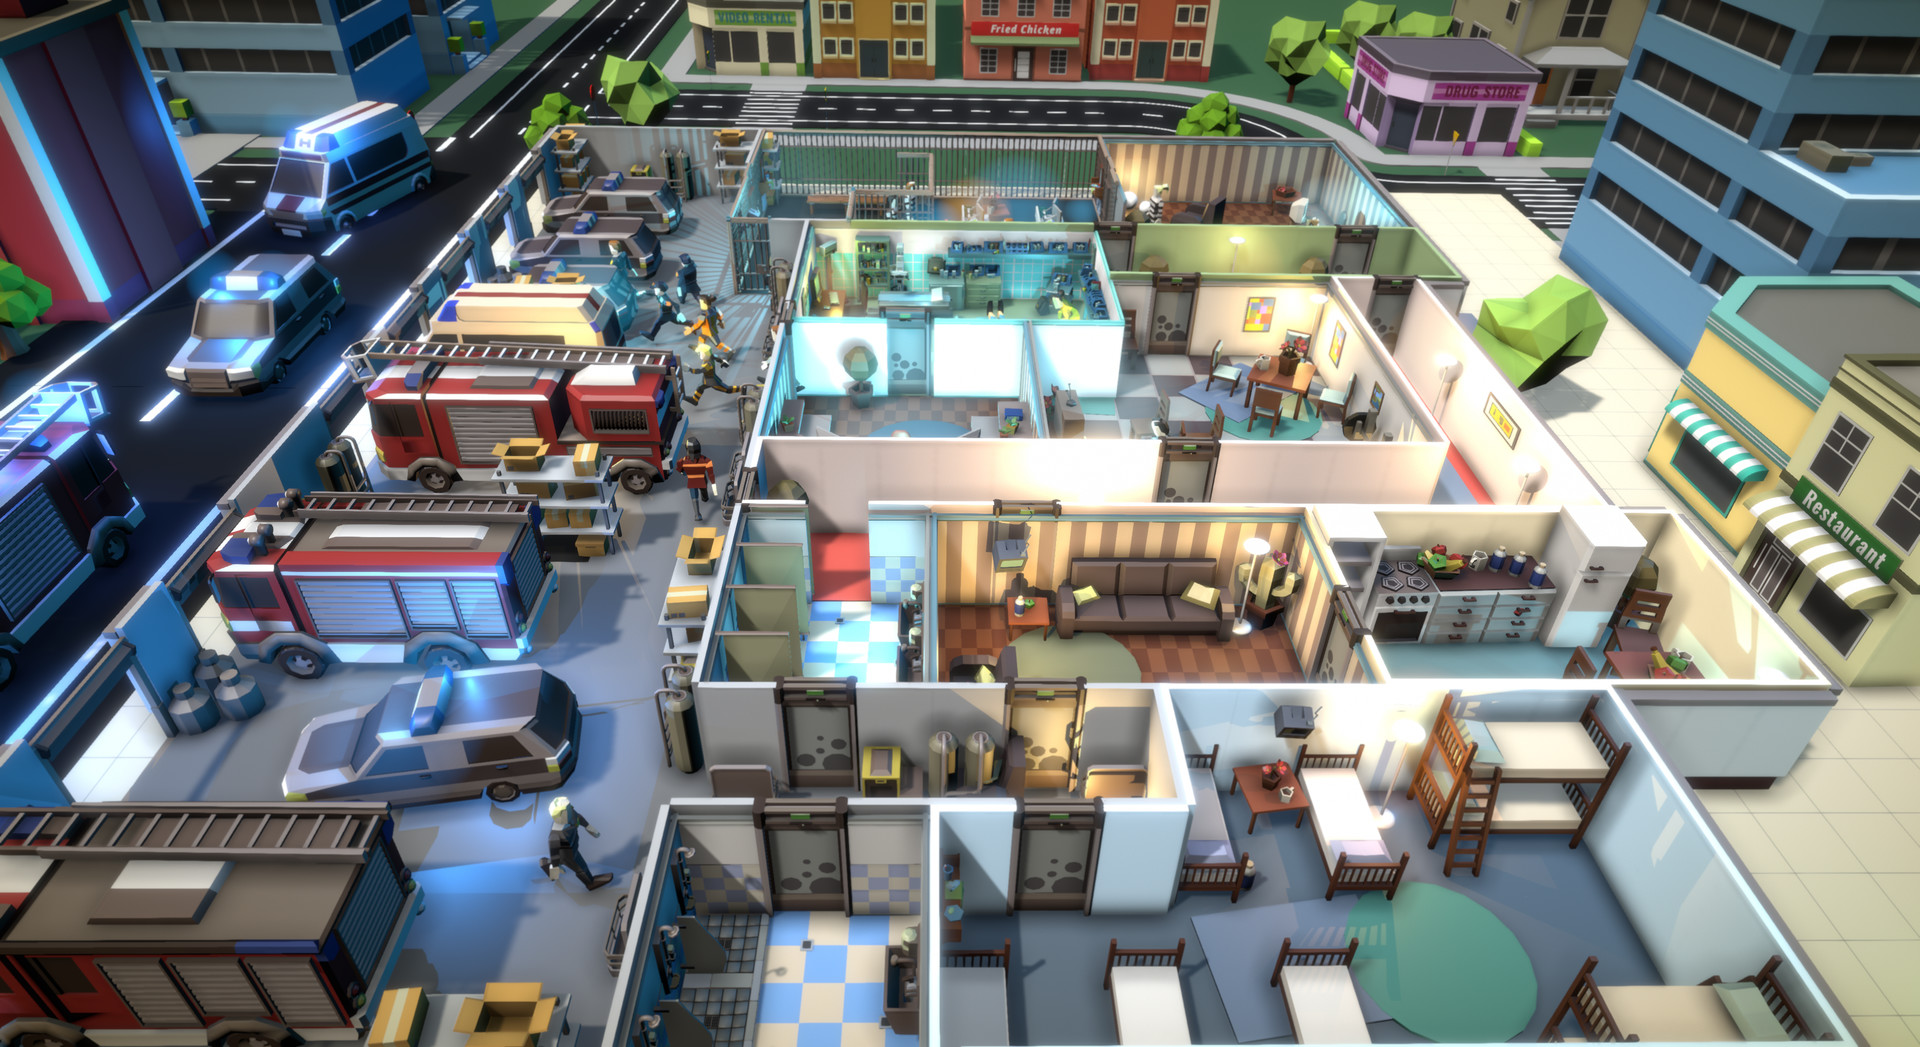 Rescue HQ - The Tycoon Free Download